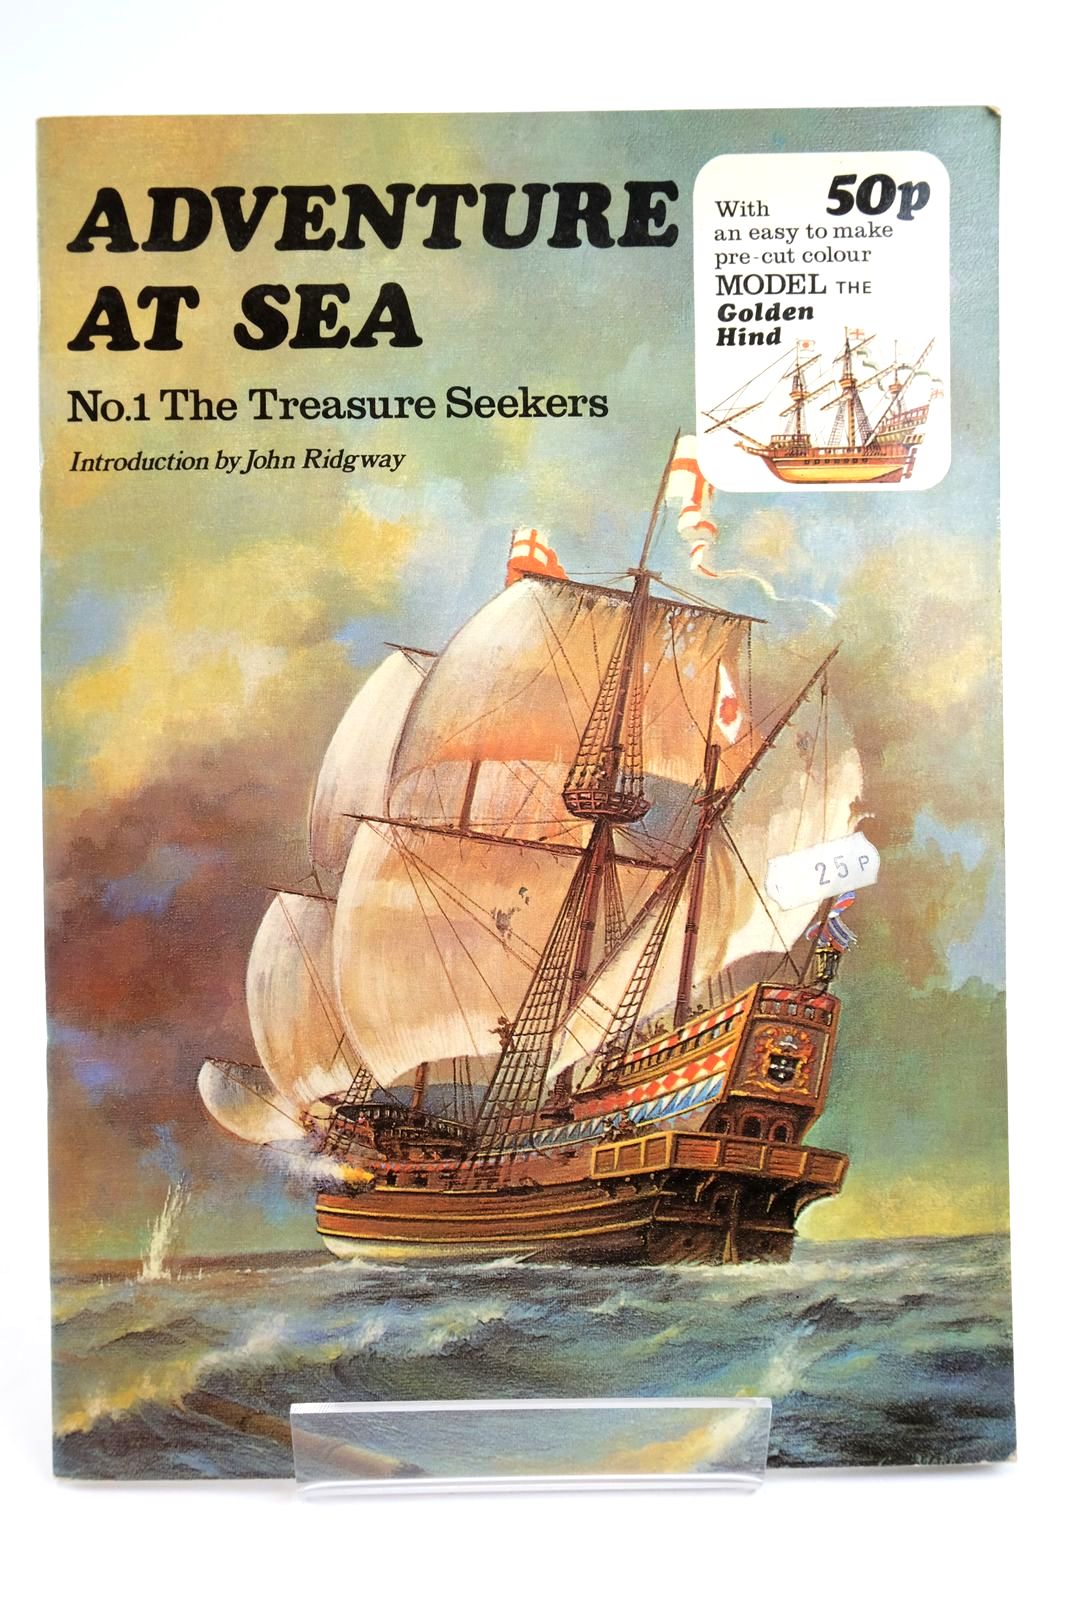 Photo of ADVENTURE AT SEA No. 1 THE TREASURE SEEKERS written by Ridgway, John Gregor, Hugh illustrated by Roll, Brian Hand, Terry published by Macmillan Leisure Books (STOCK CODE: 2135196)  for sale by Stella & Rose's Books